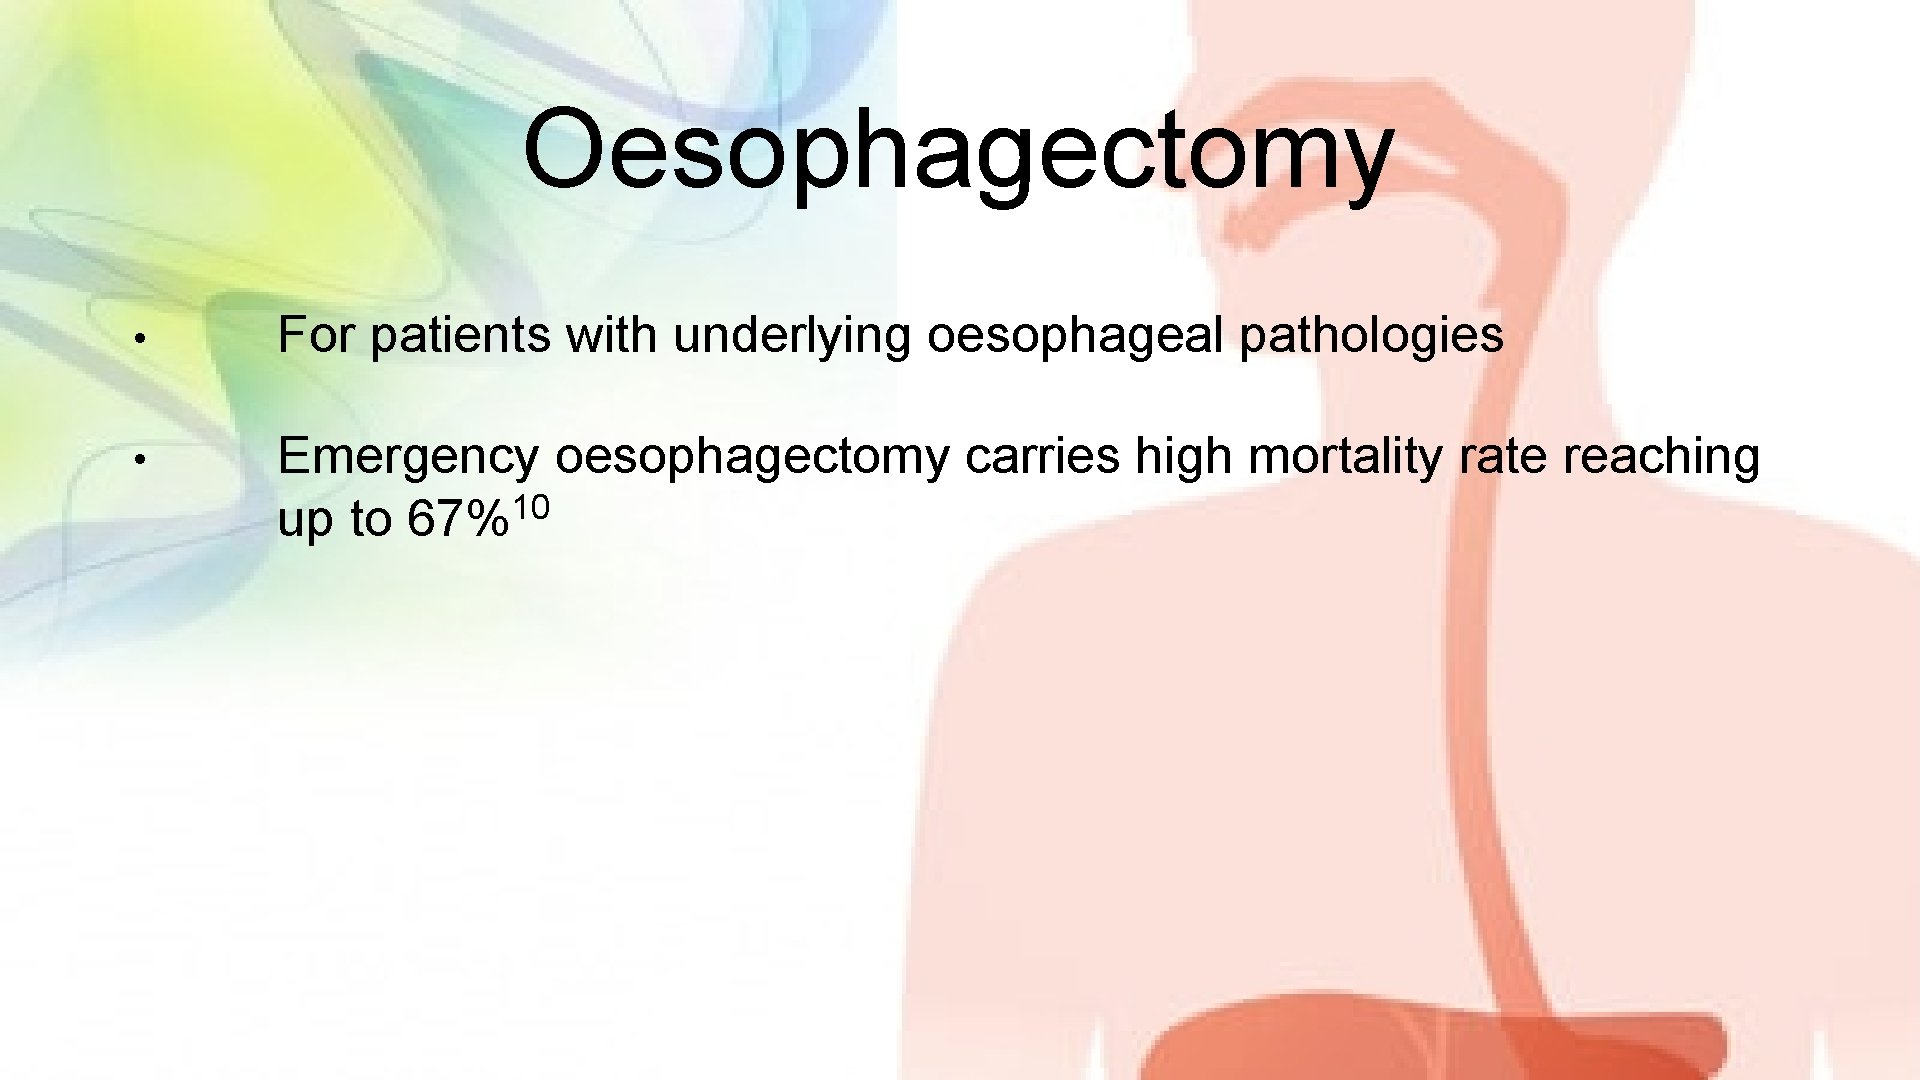 Oesophagectomy • For patients with underlying oesophageal pathologies • Emergency oesophagectomy carries high mortality